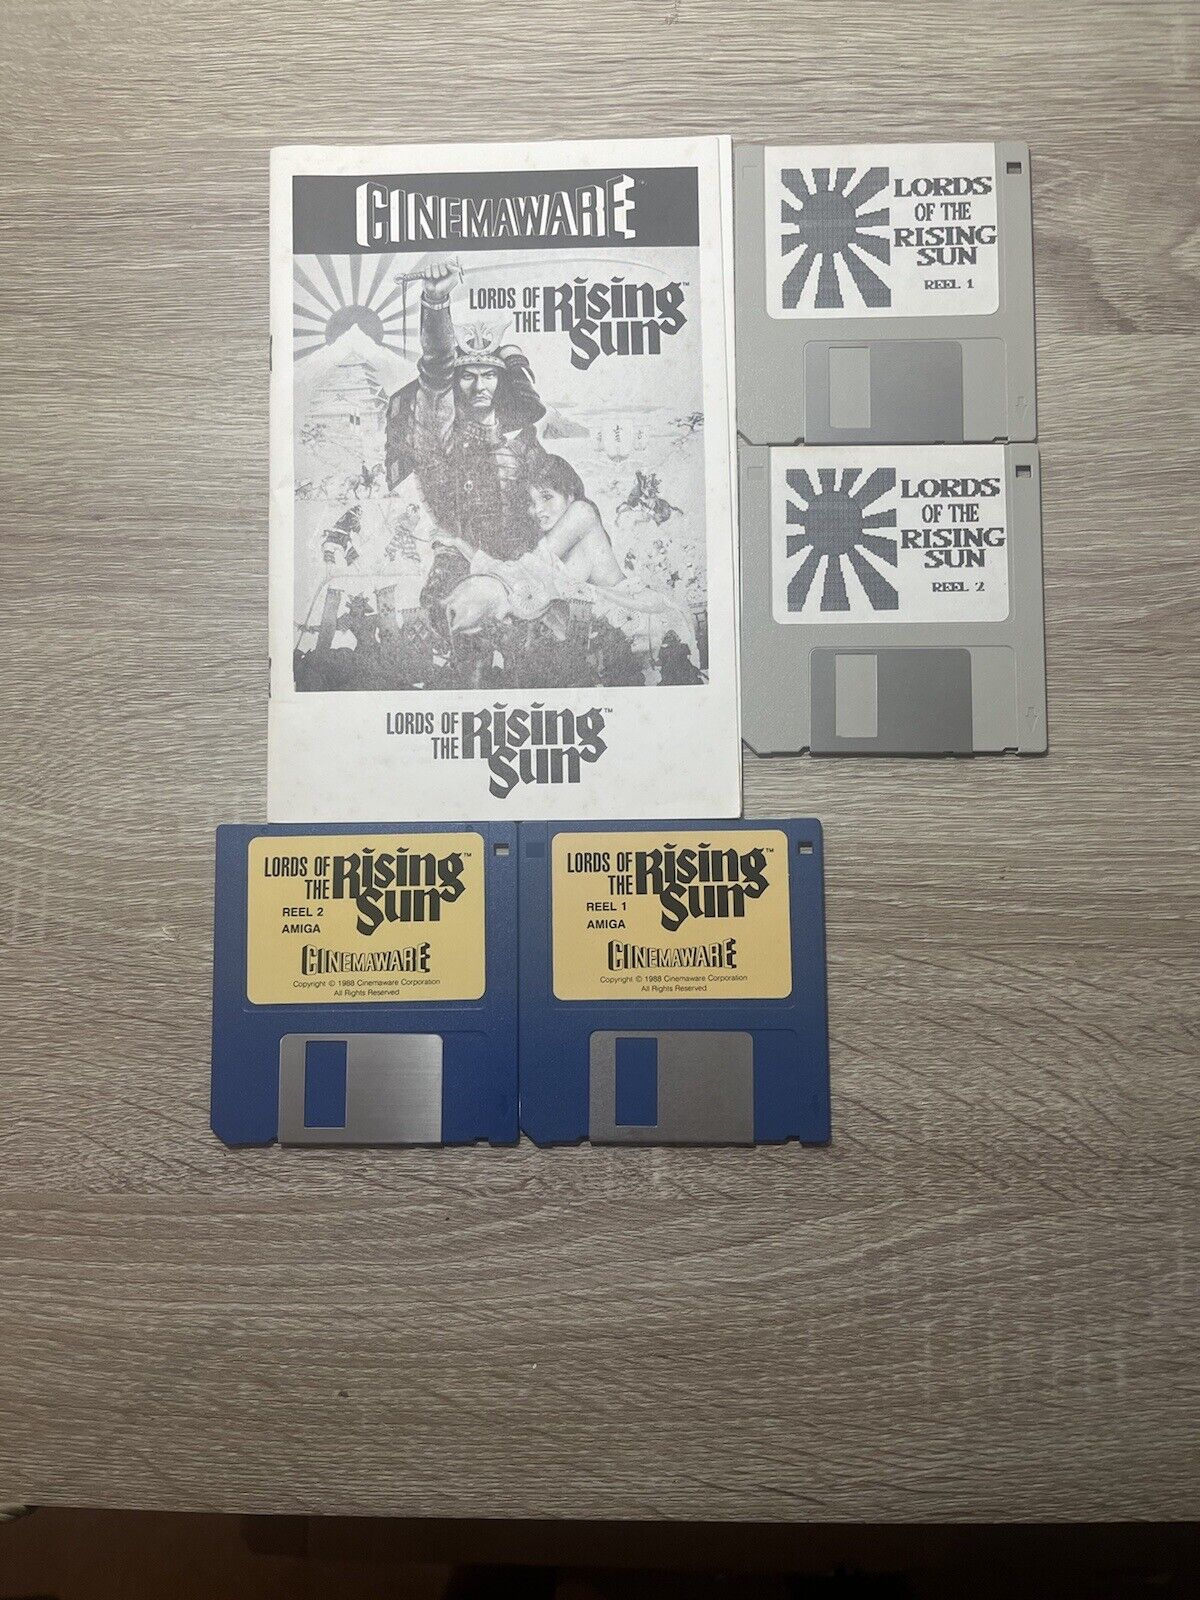 1988 Commodore Amiga Game Lords Of The Rising Sun, by Cinemaware Reel 1 & 2.